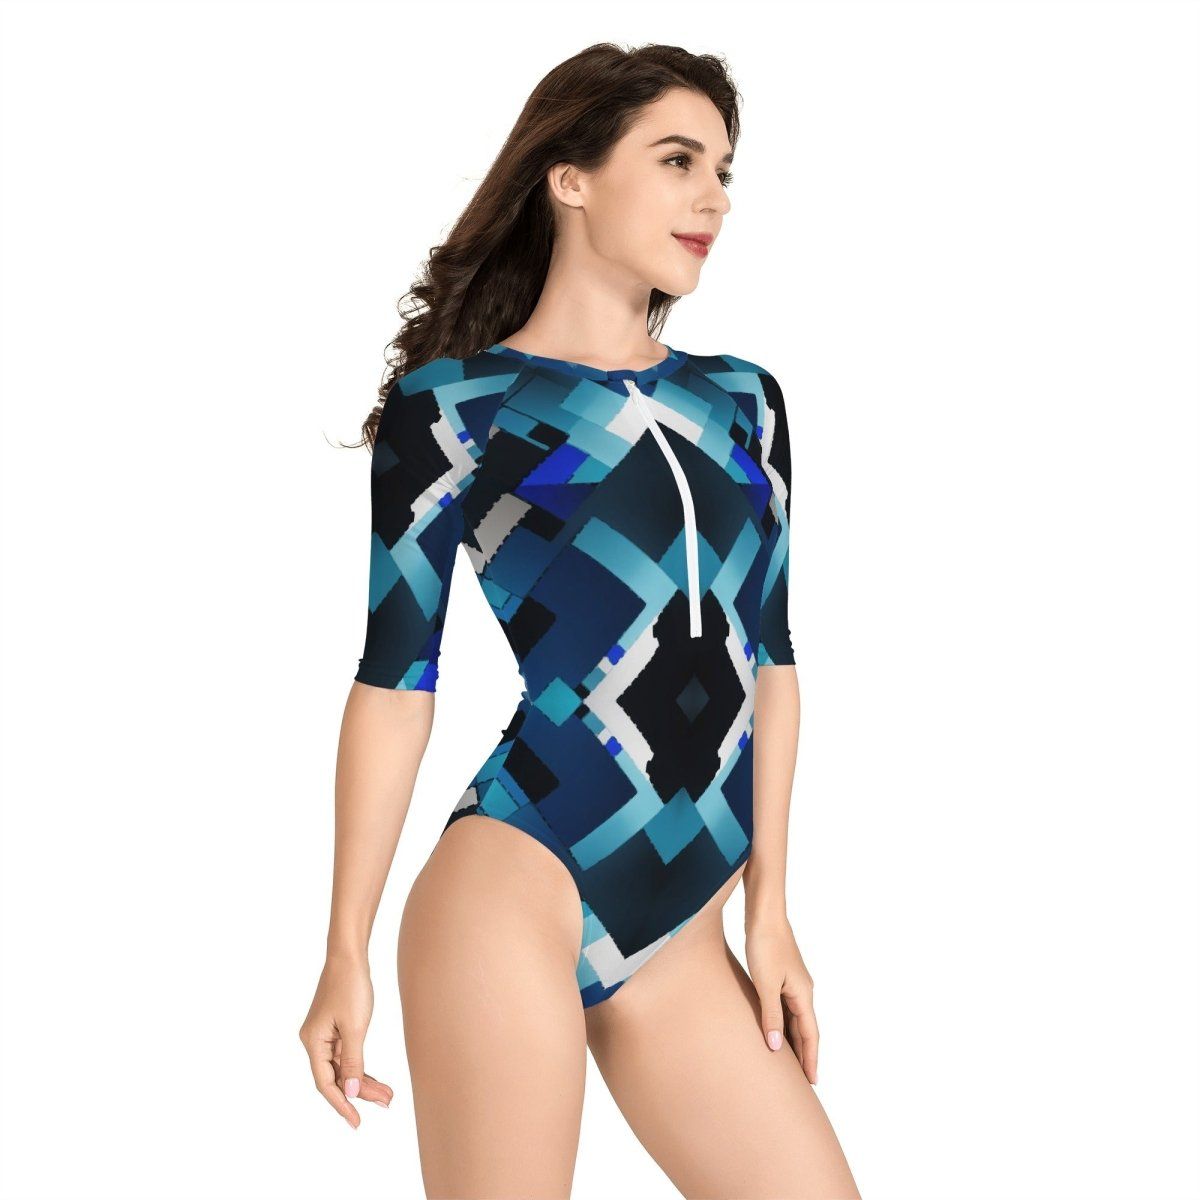 Black and Blue Womens Half Sleeve Zip Front One Piece Swimsuit - Perfect for Active Days at the Beach - Iron Phoenix GHG